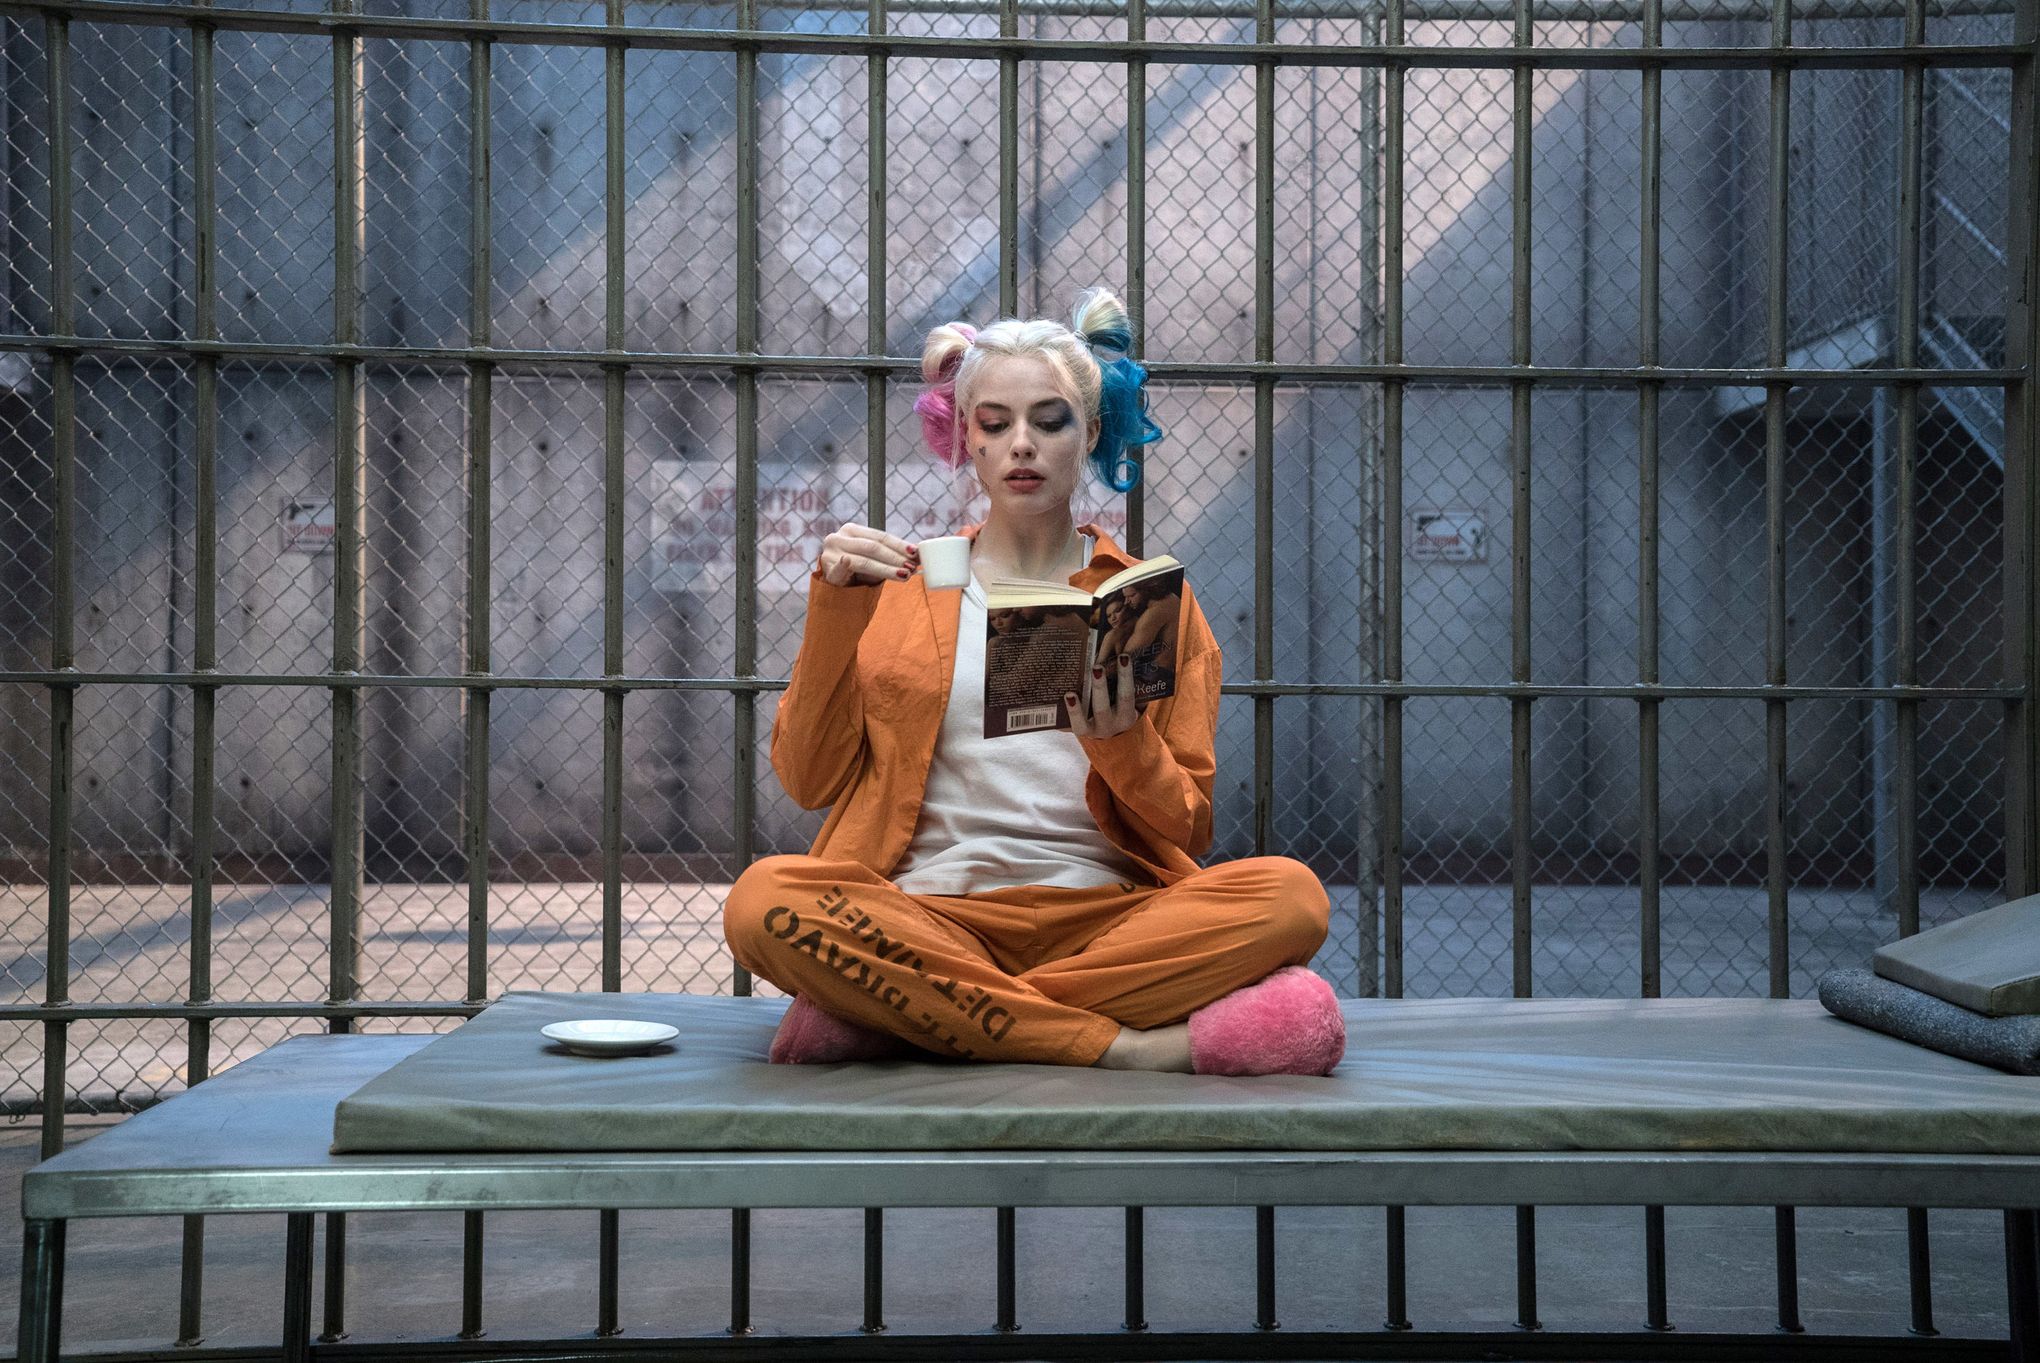 How 'Suicide Squad' Messed Up Harley Quinn